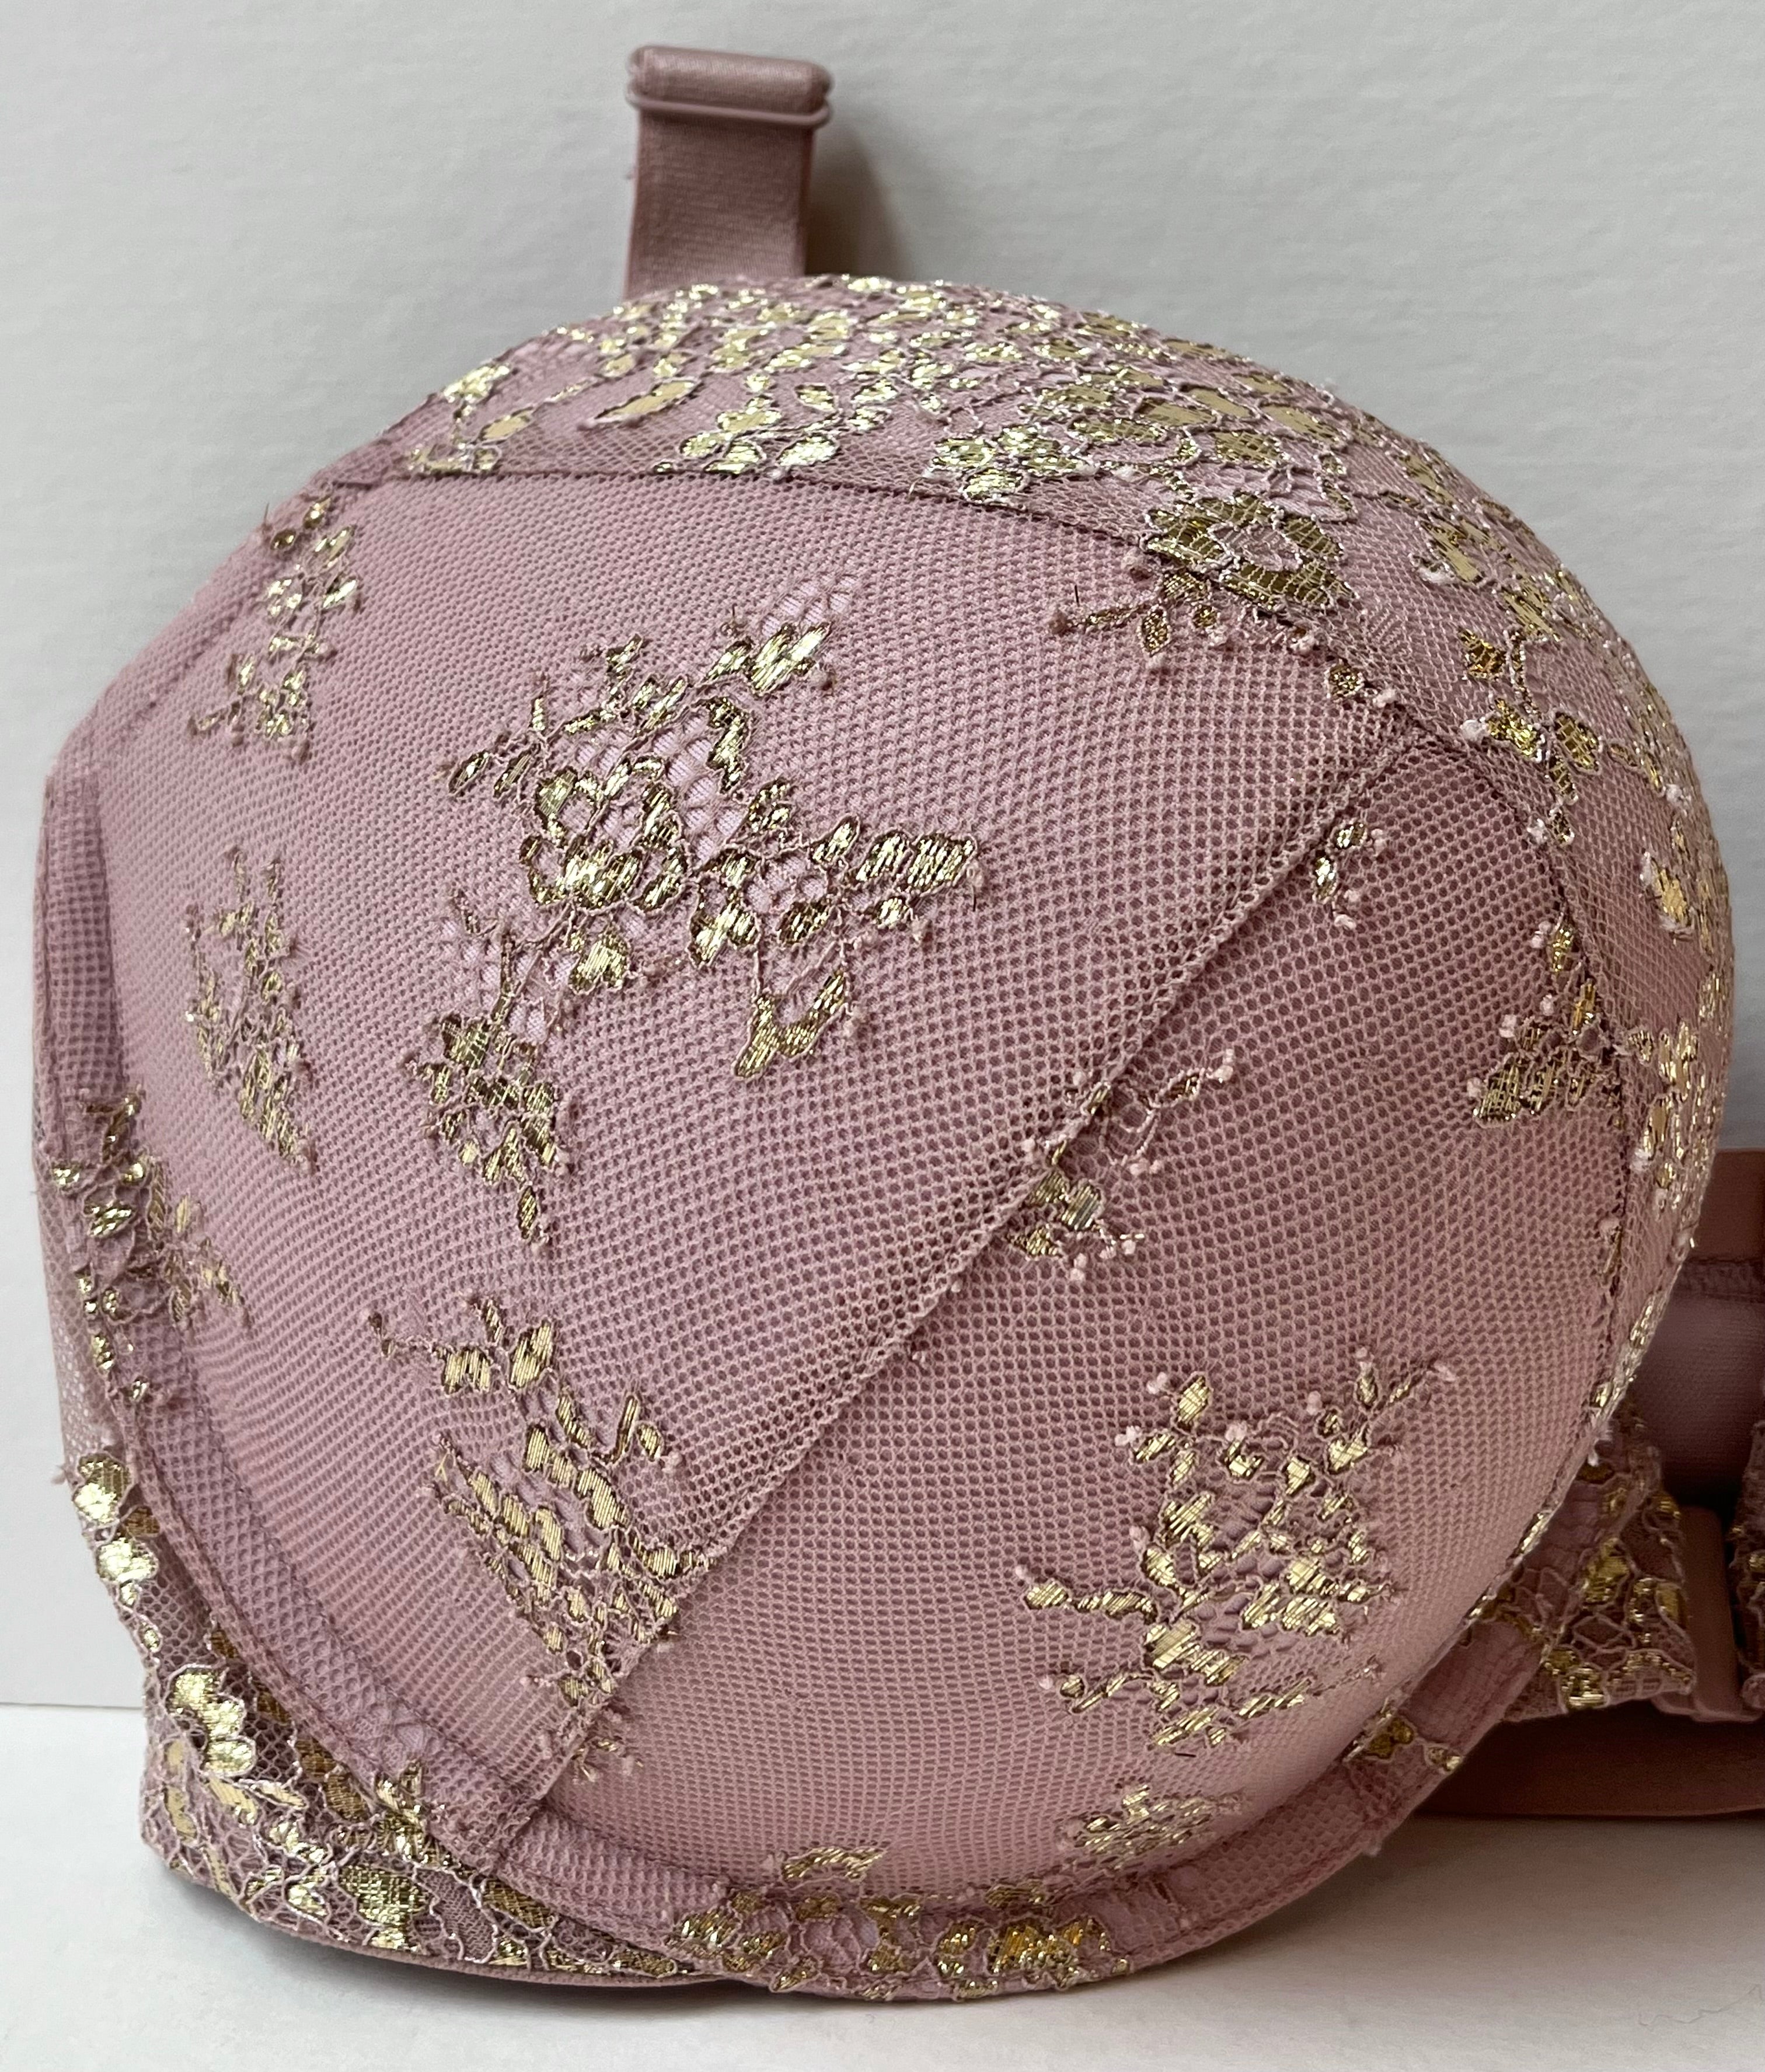 NEW Pre-Owned Victoria’s Secret Very Sexy Blush/Gold Lace Push Up Bra, Size: 38DD